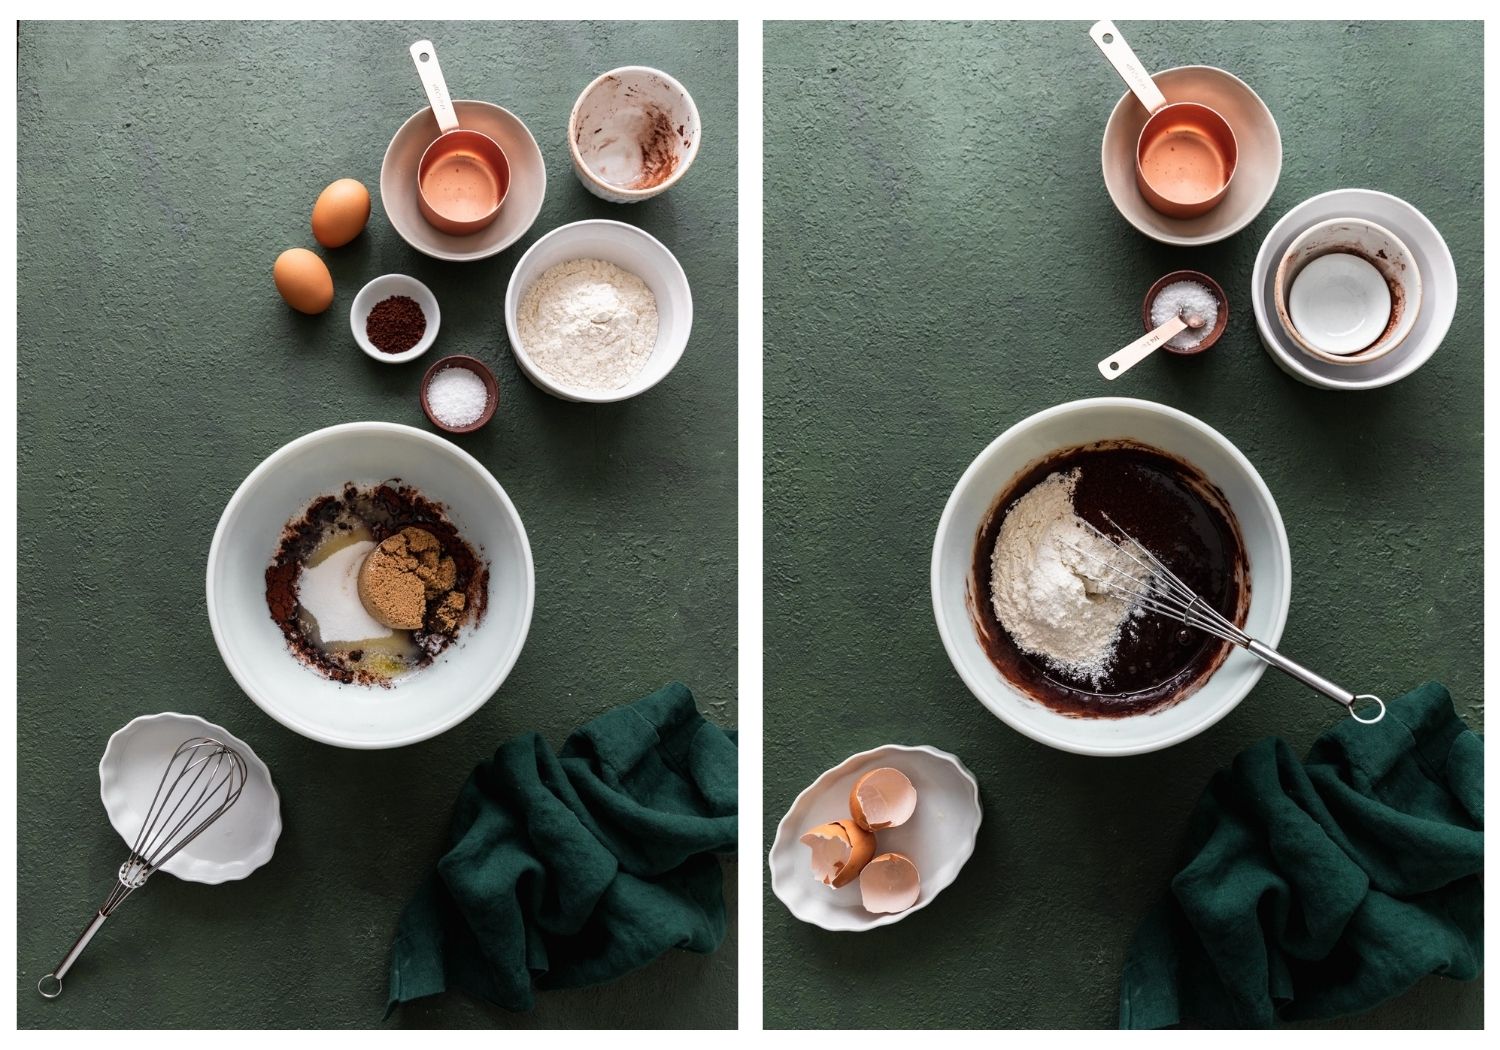 Two images; on the left, a white bowl on a dark green table with wet baking ingredients, surrounded by more baking ingredients. On the right, the bowl is filled with chocolate batter and topped with flour.